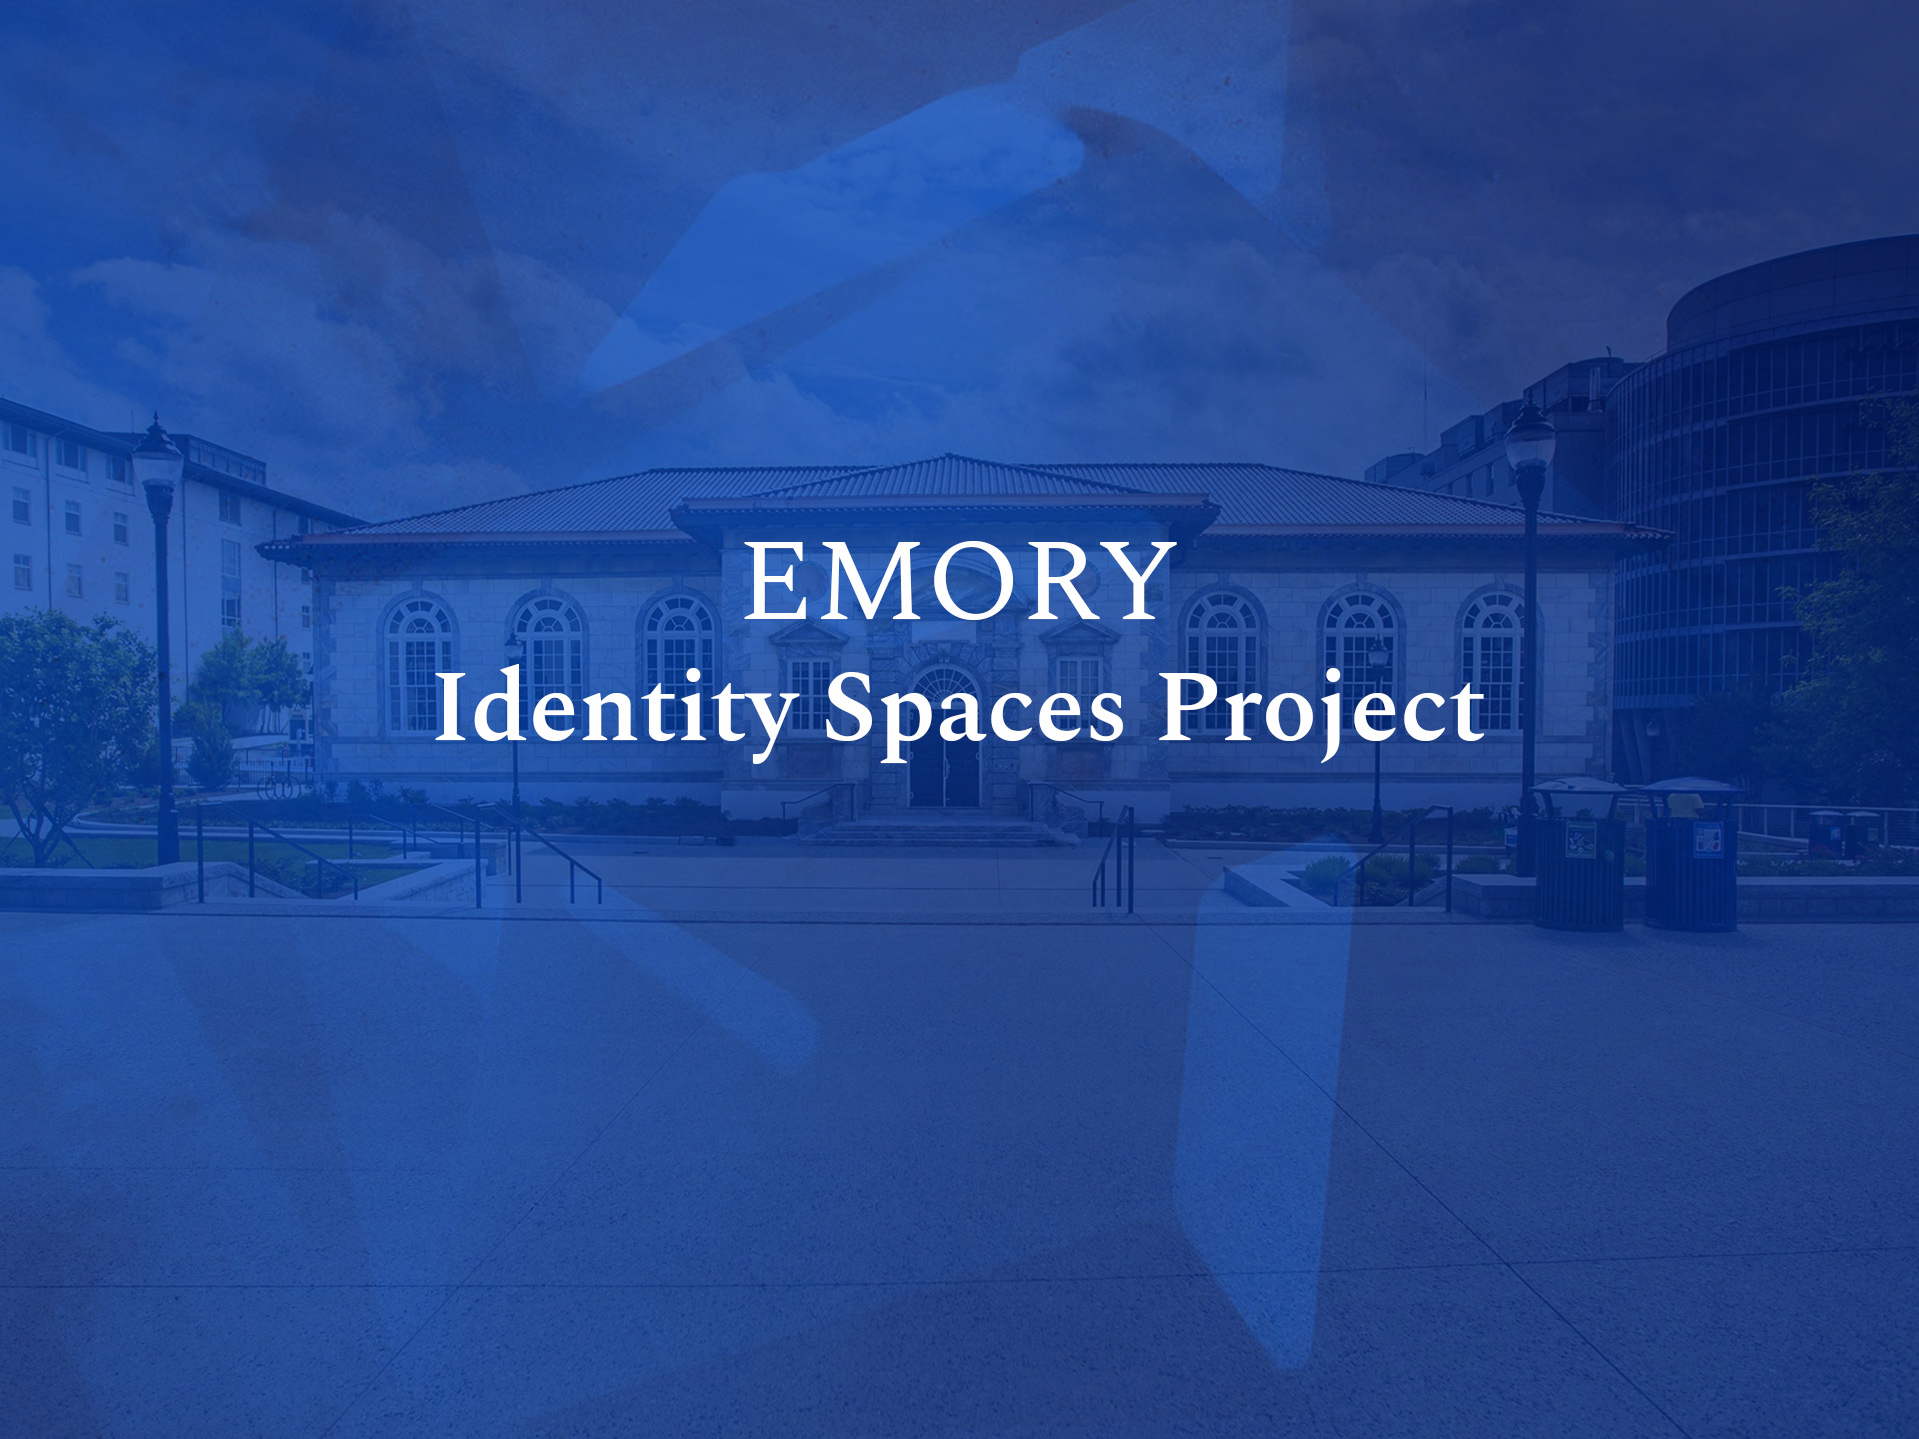 Emory Identity Spaces Project